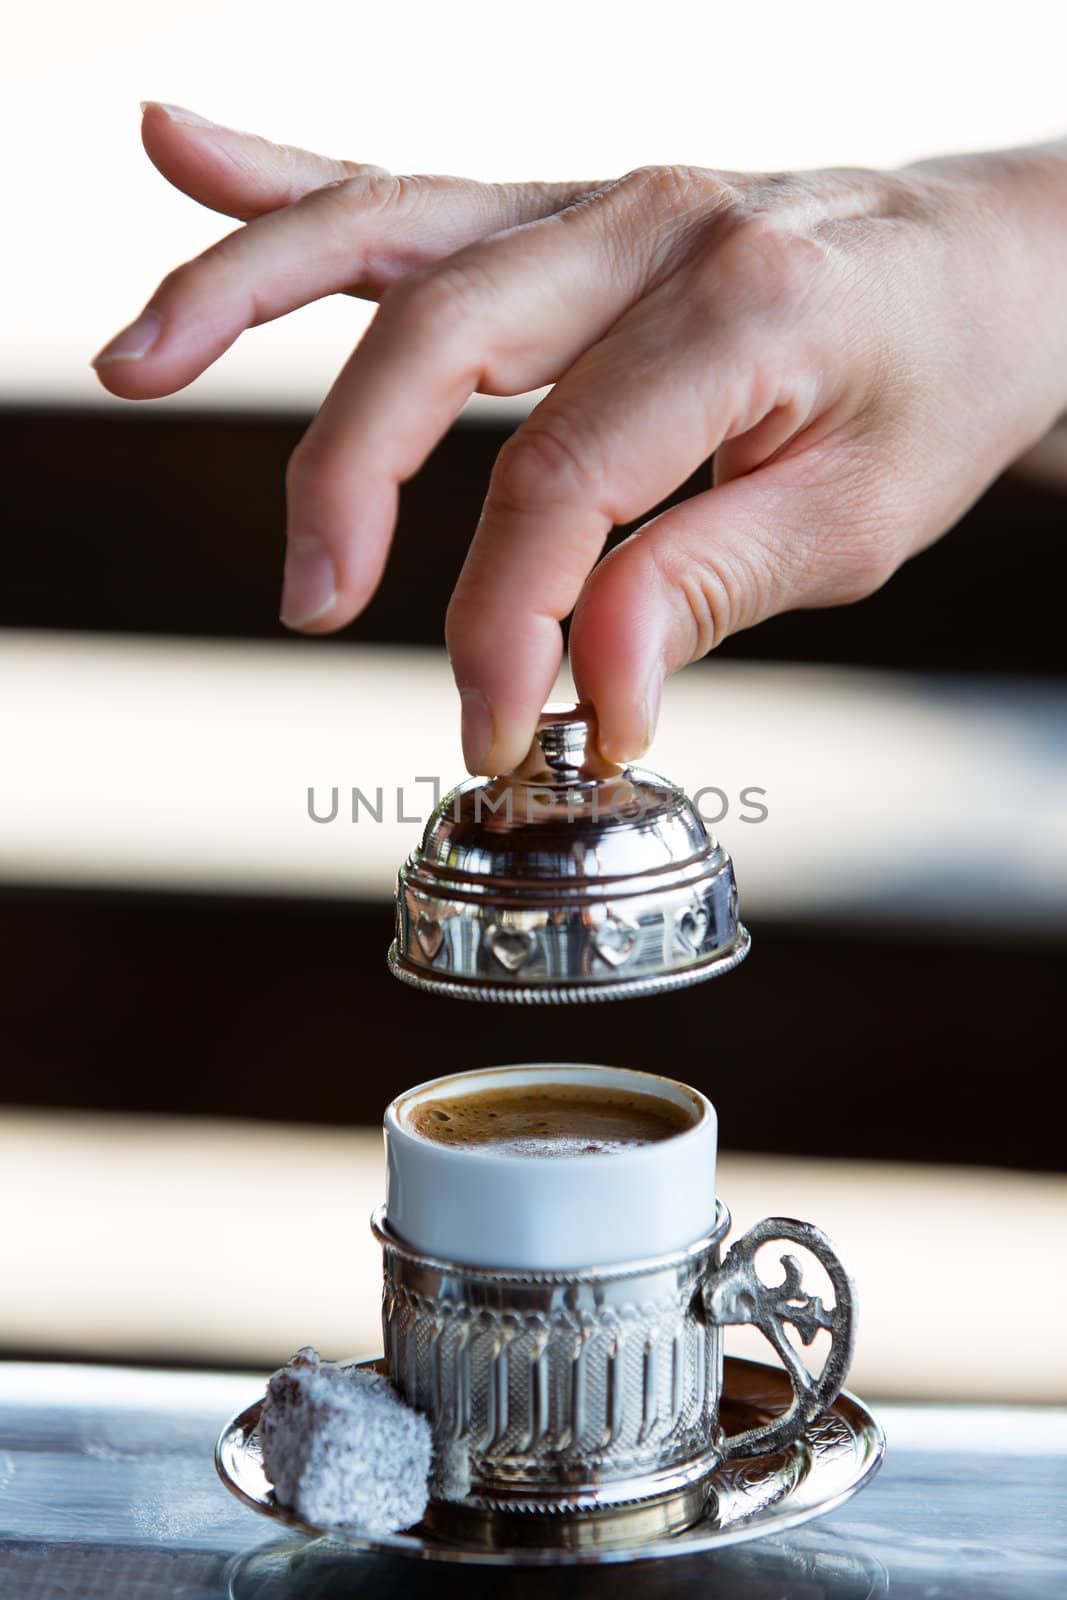 Turkish Coffee served in silver housing with a Turkish delight and ready to take a sip. Clean hands elegantly removing the cap.